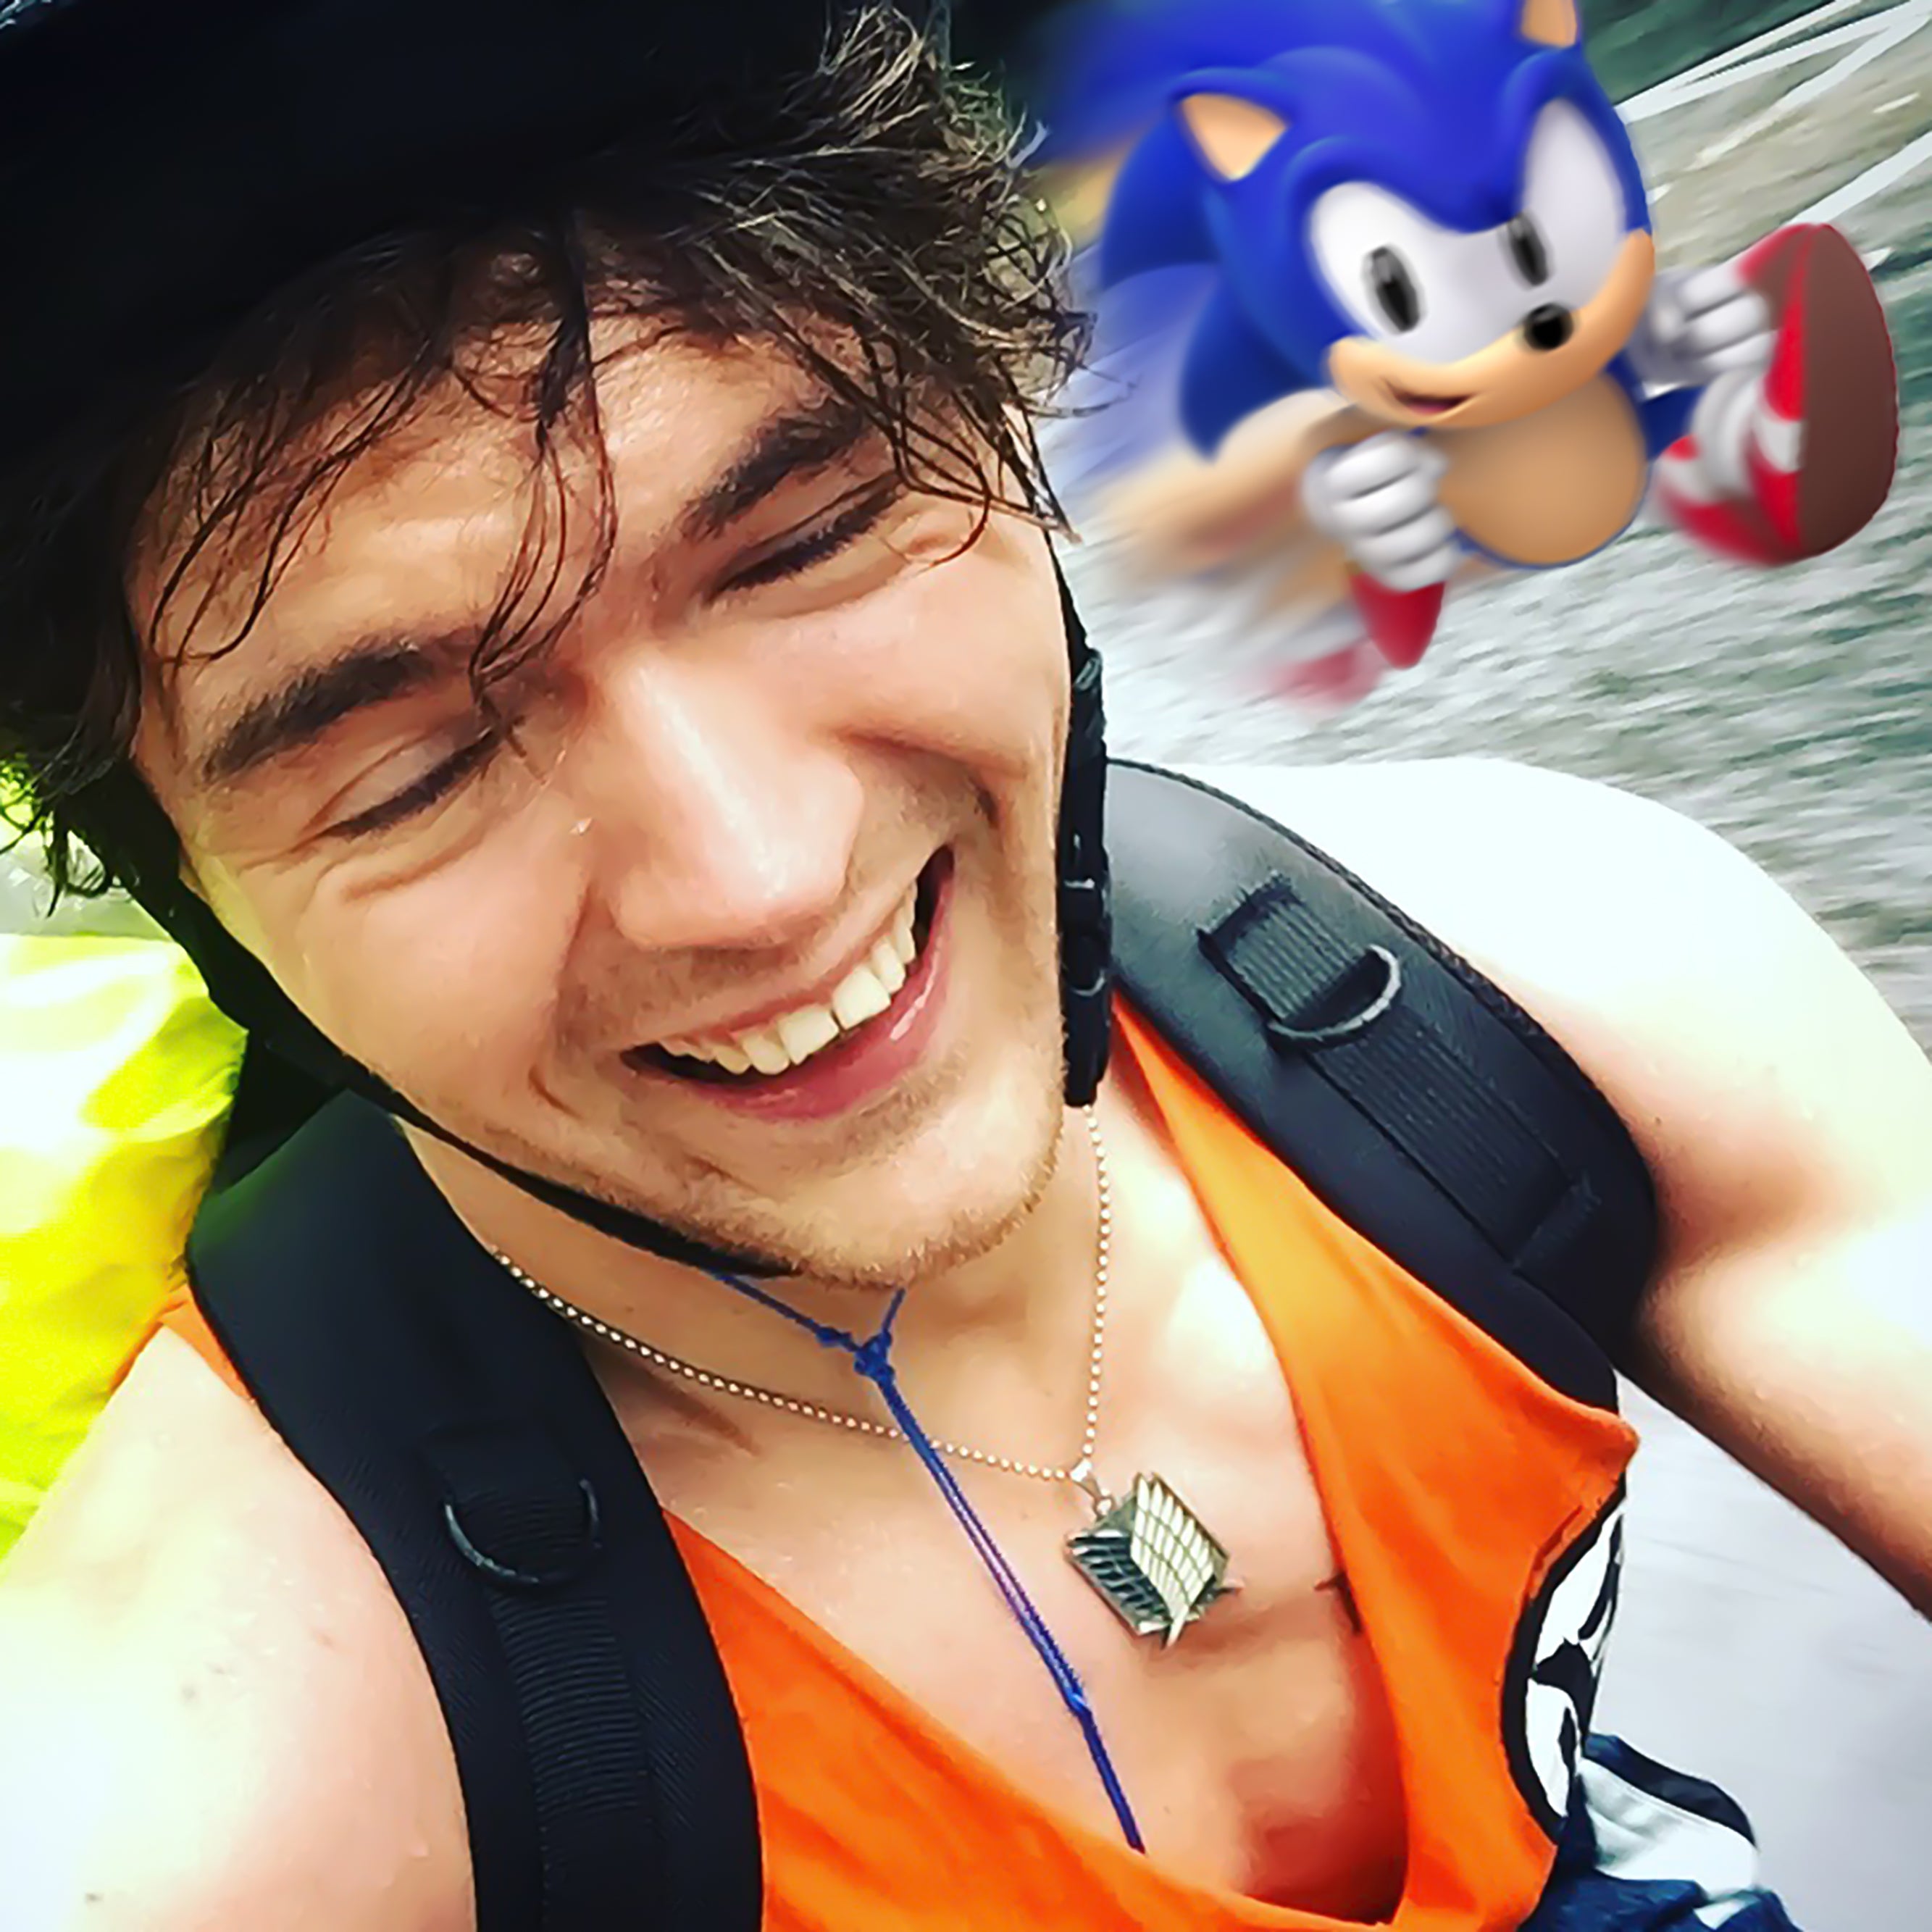 What speed-running Sonic the hedgehog taught me about fitness